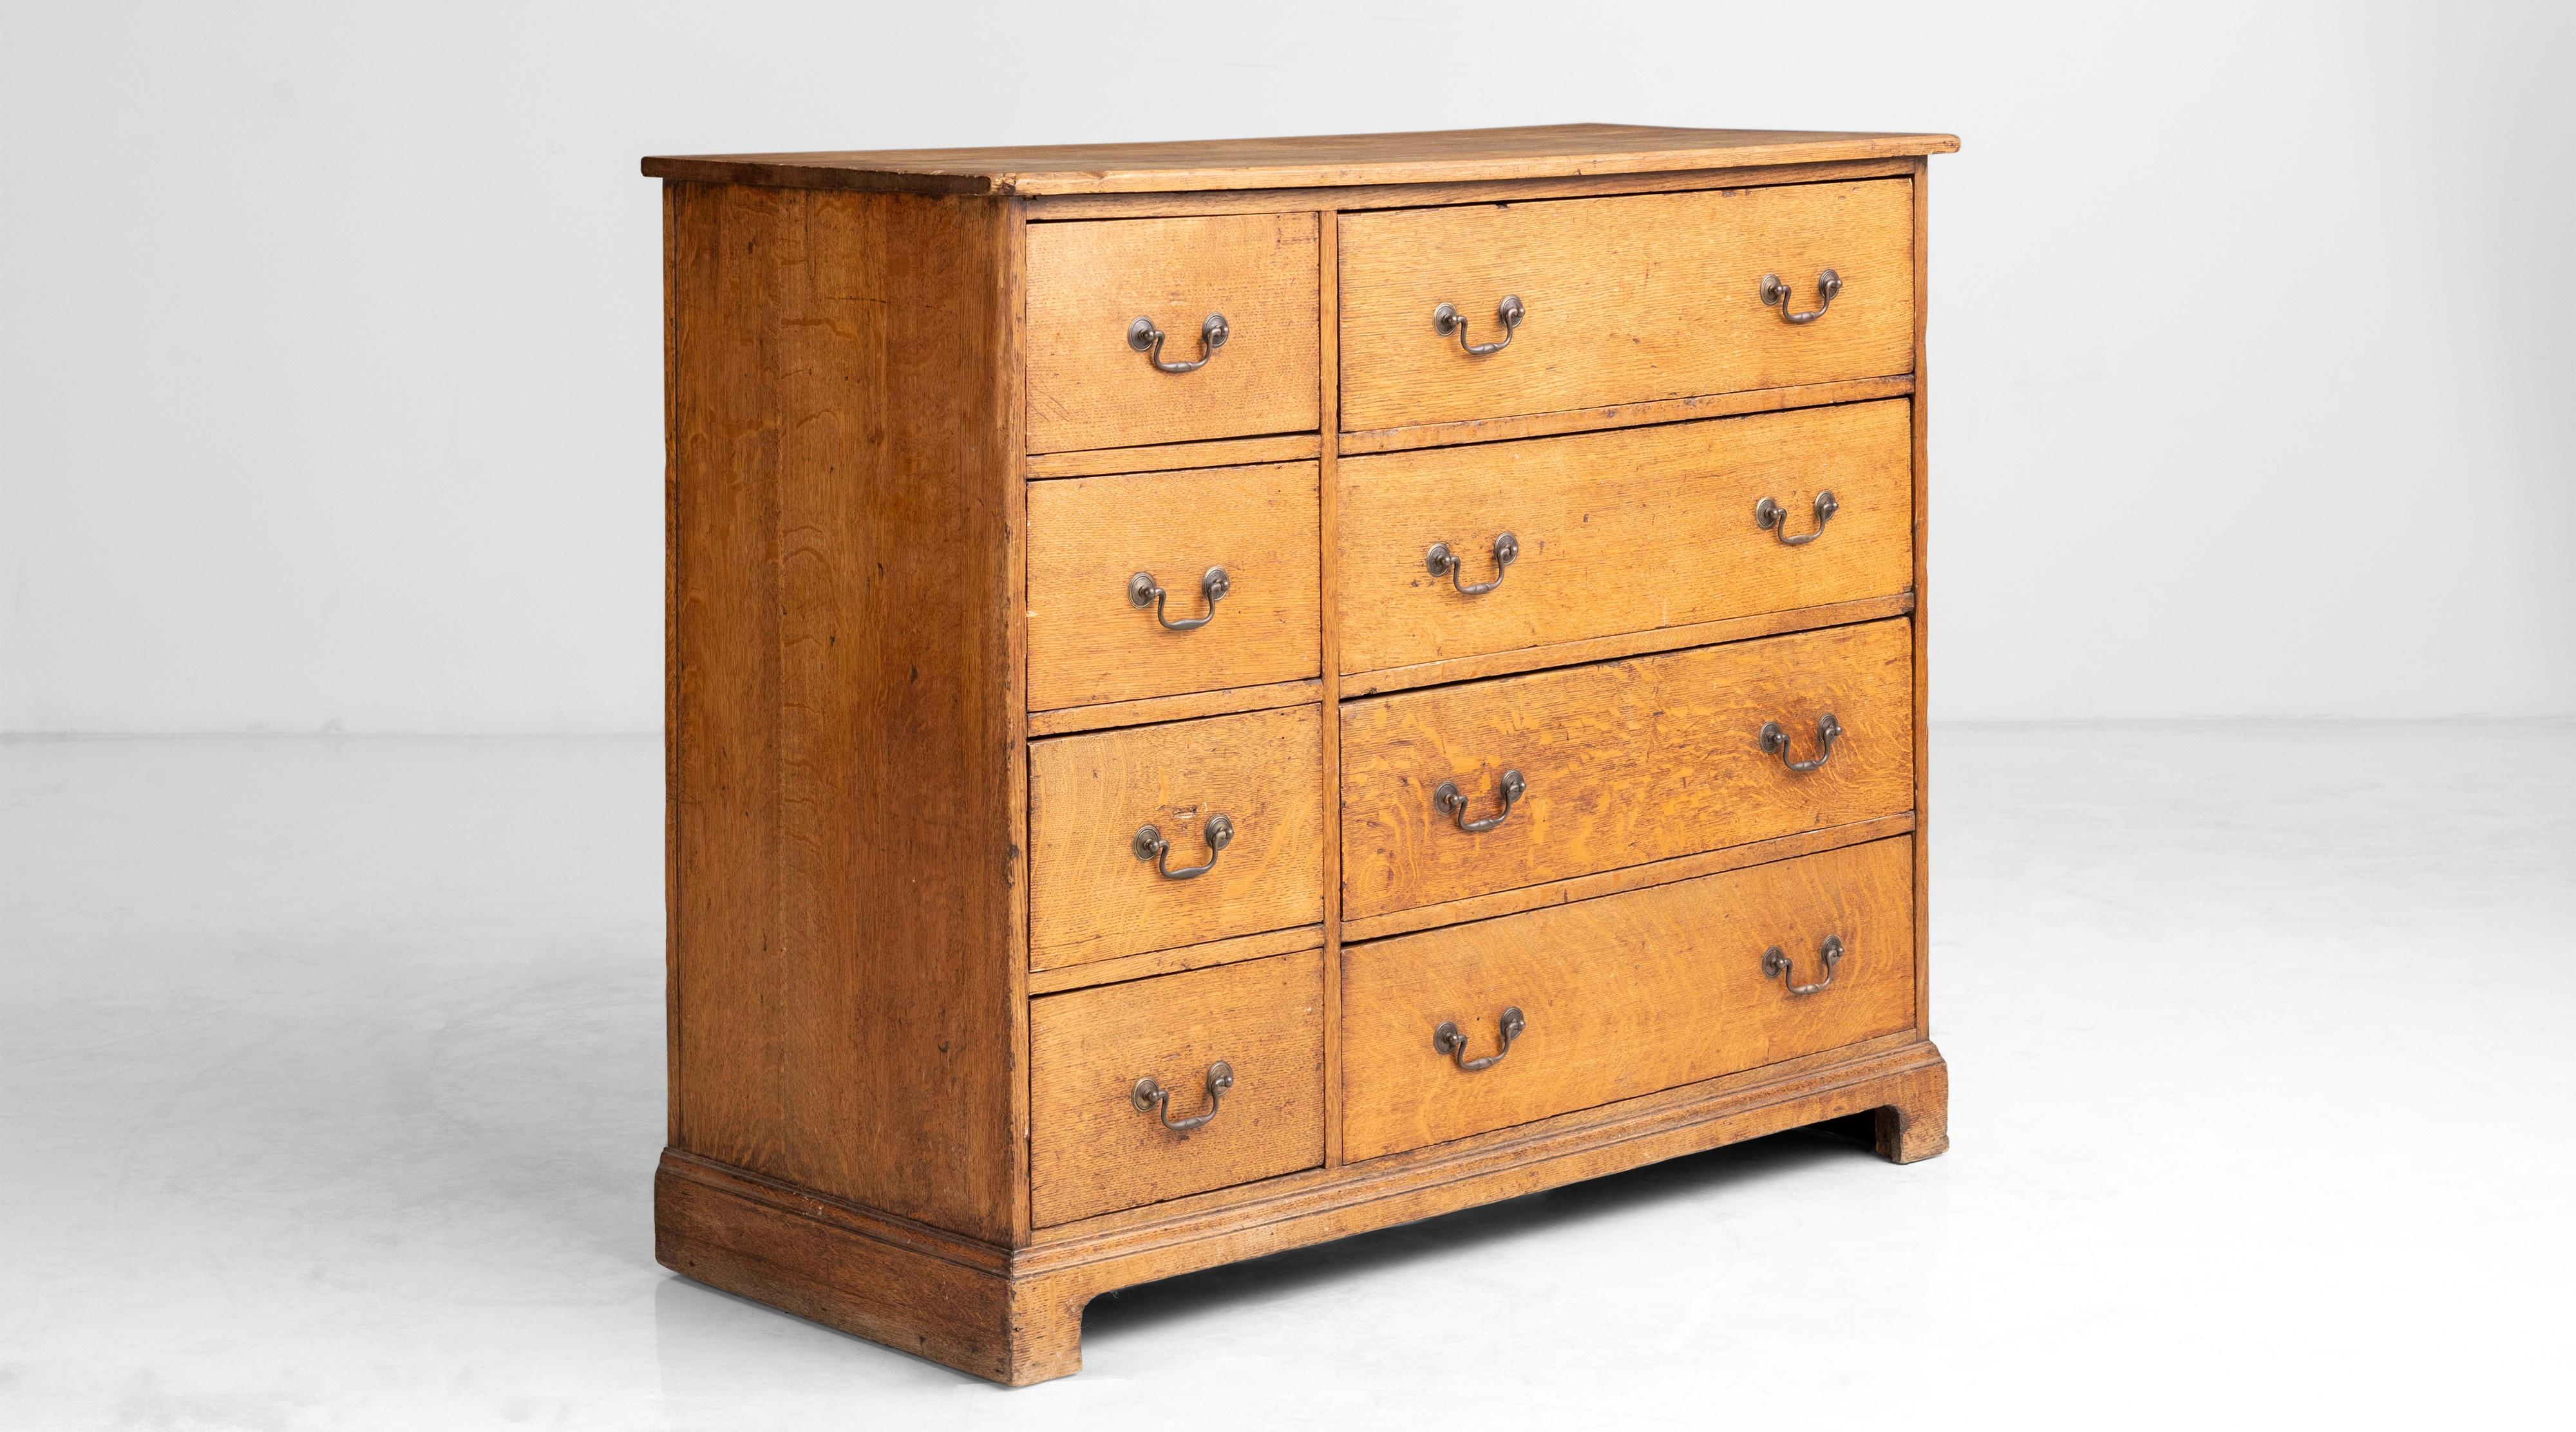 Oak chest of drawers

England circa 1900

Finely made chest by Waring & Gillow.

Measures: 51.25” L x 22” D x 43” H.
 